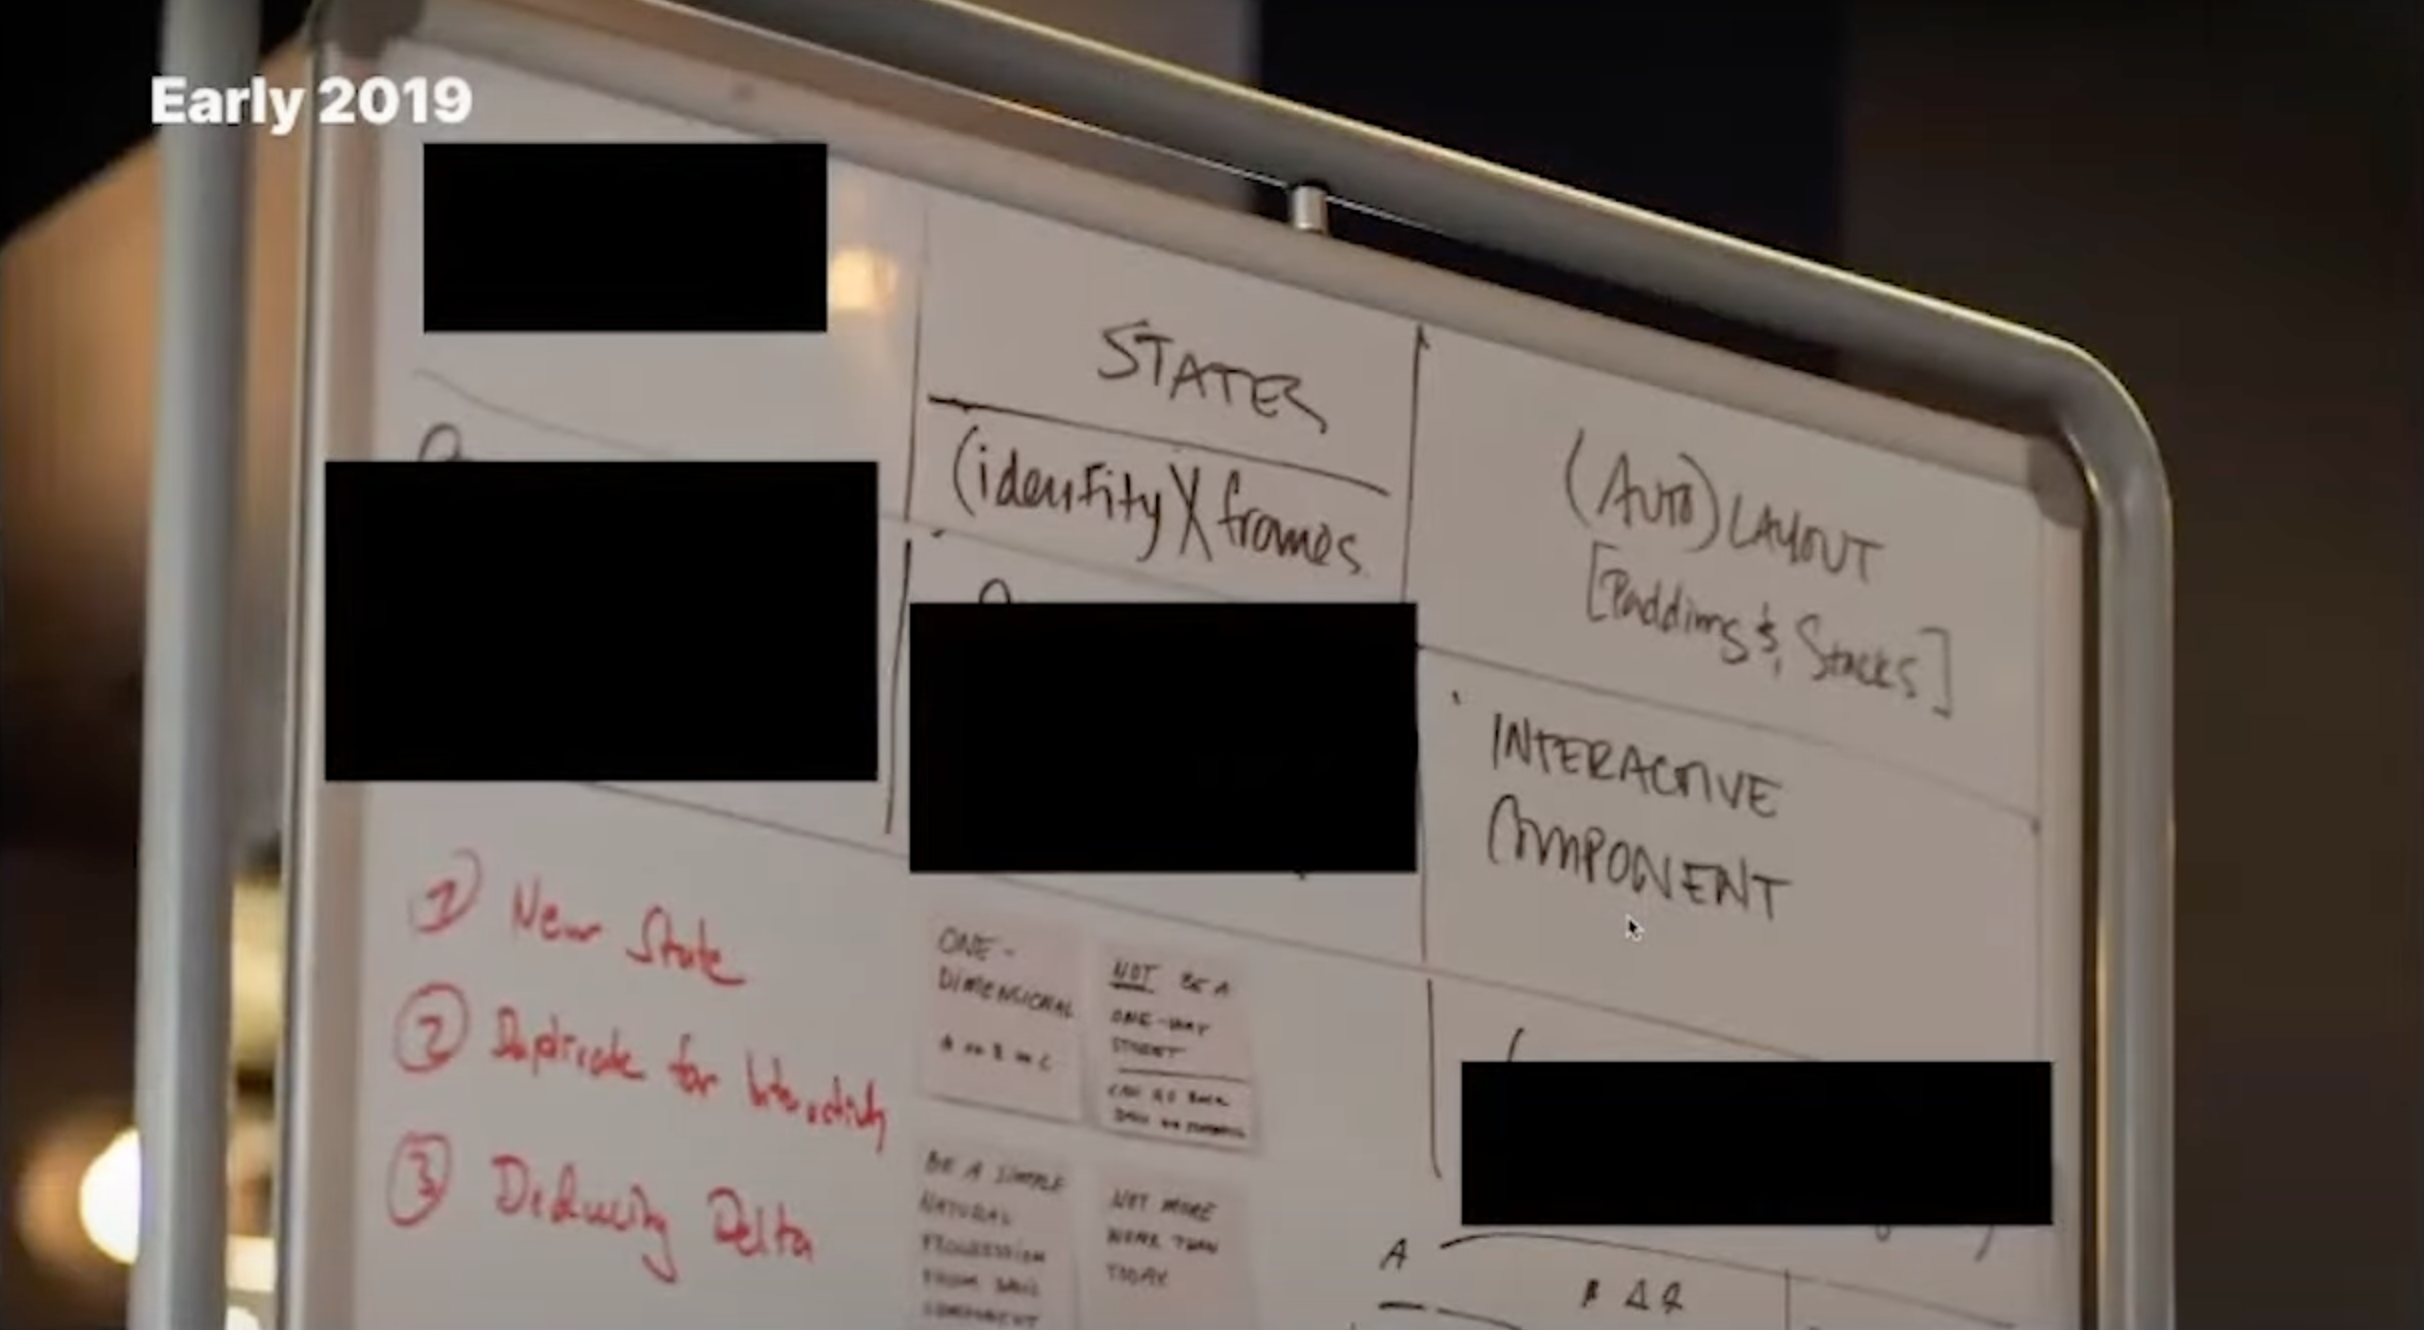 white board shows writing with black rectangles obscuring content